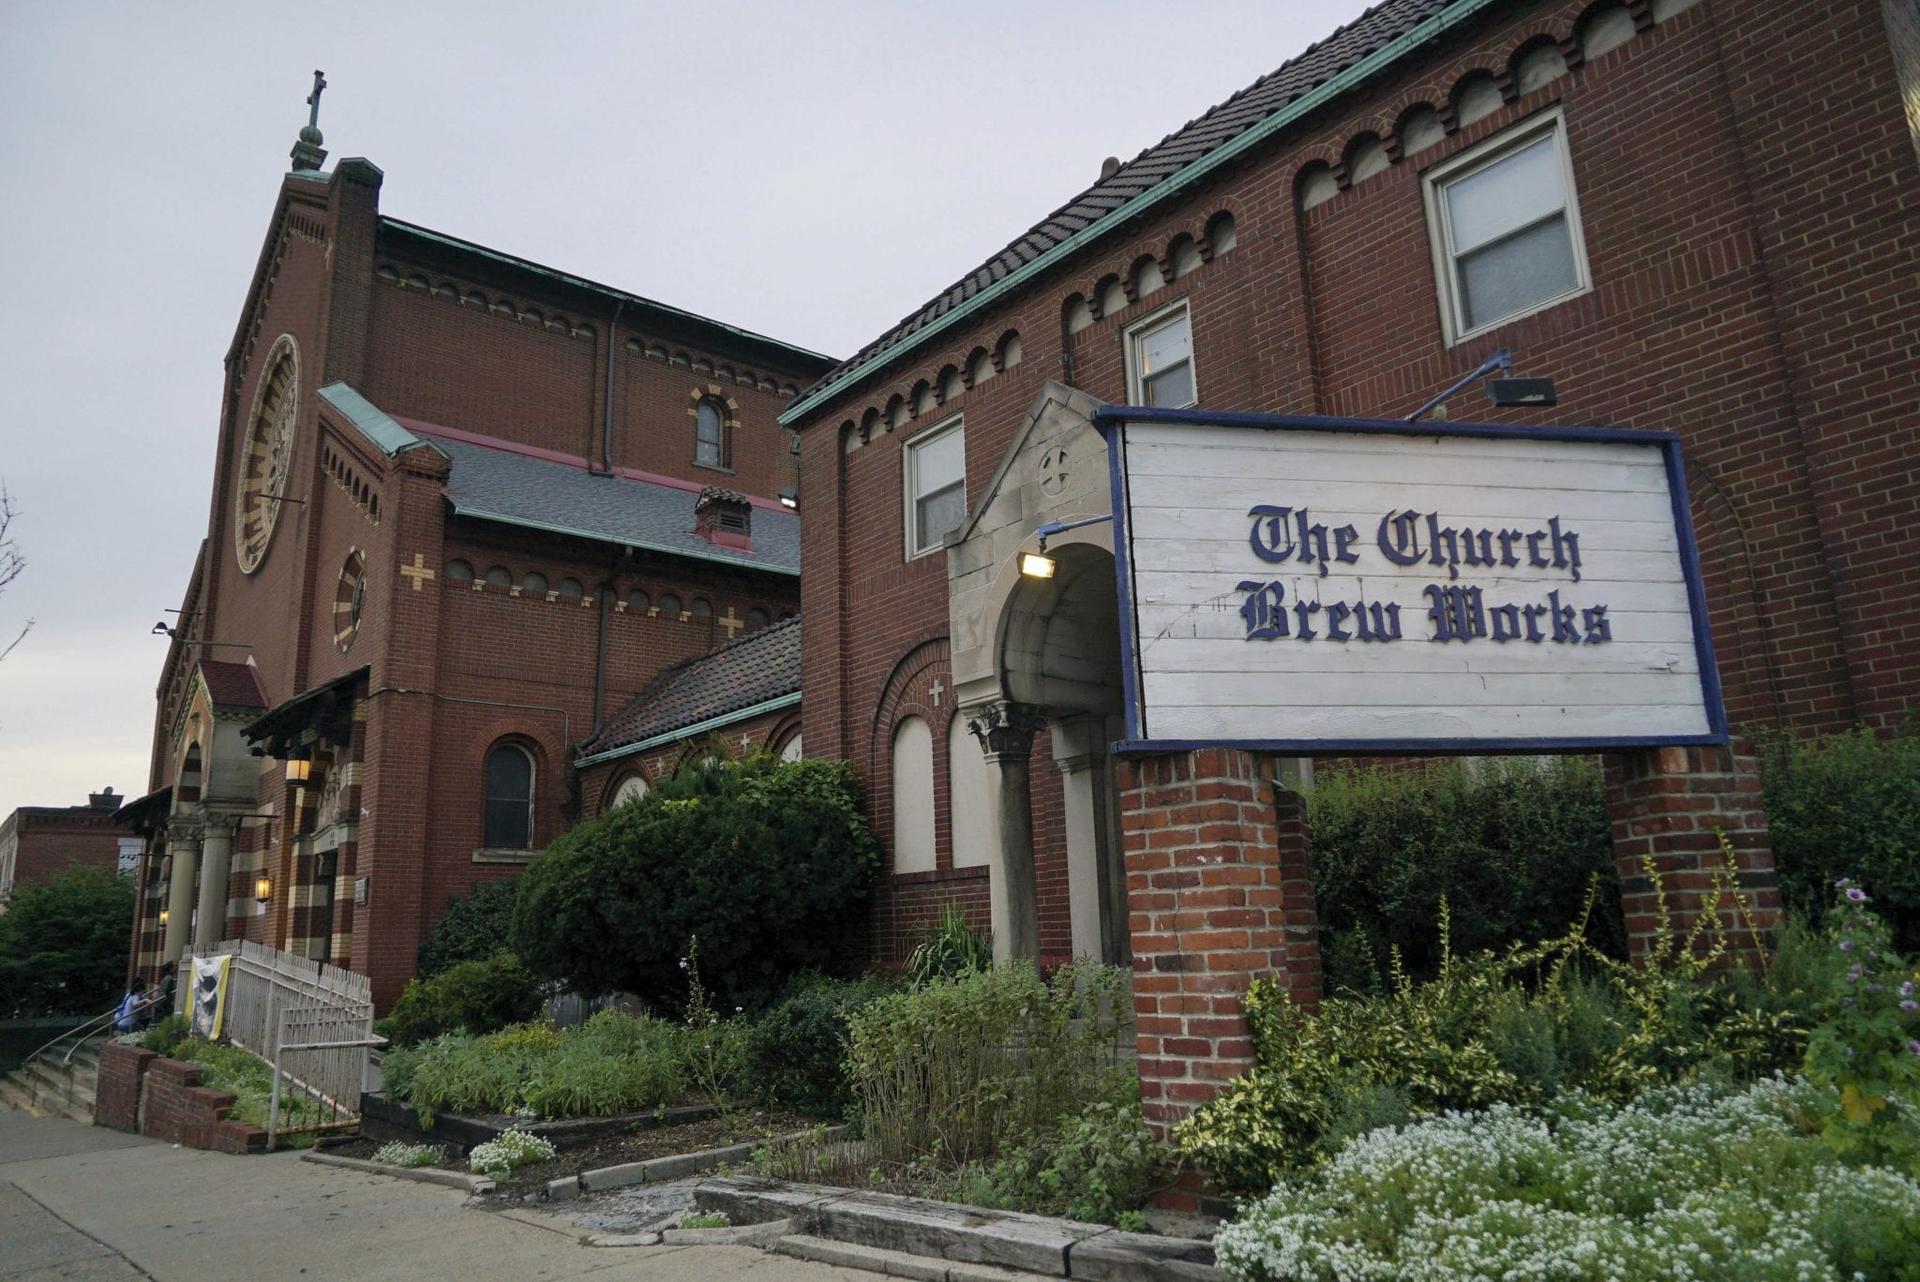 Holy spirits? Closed churches find second life as breweries